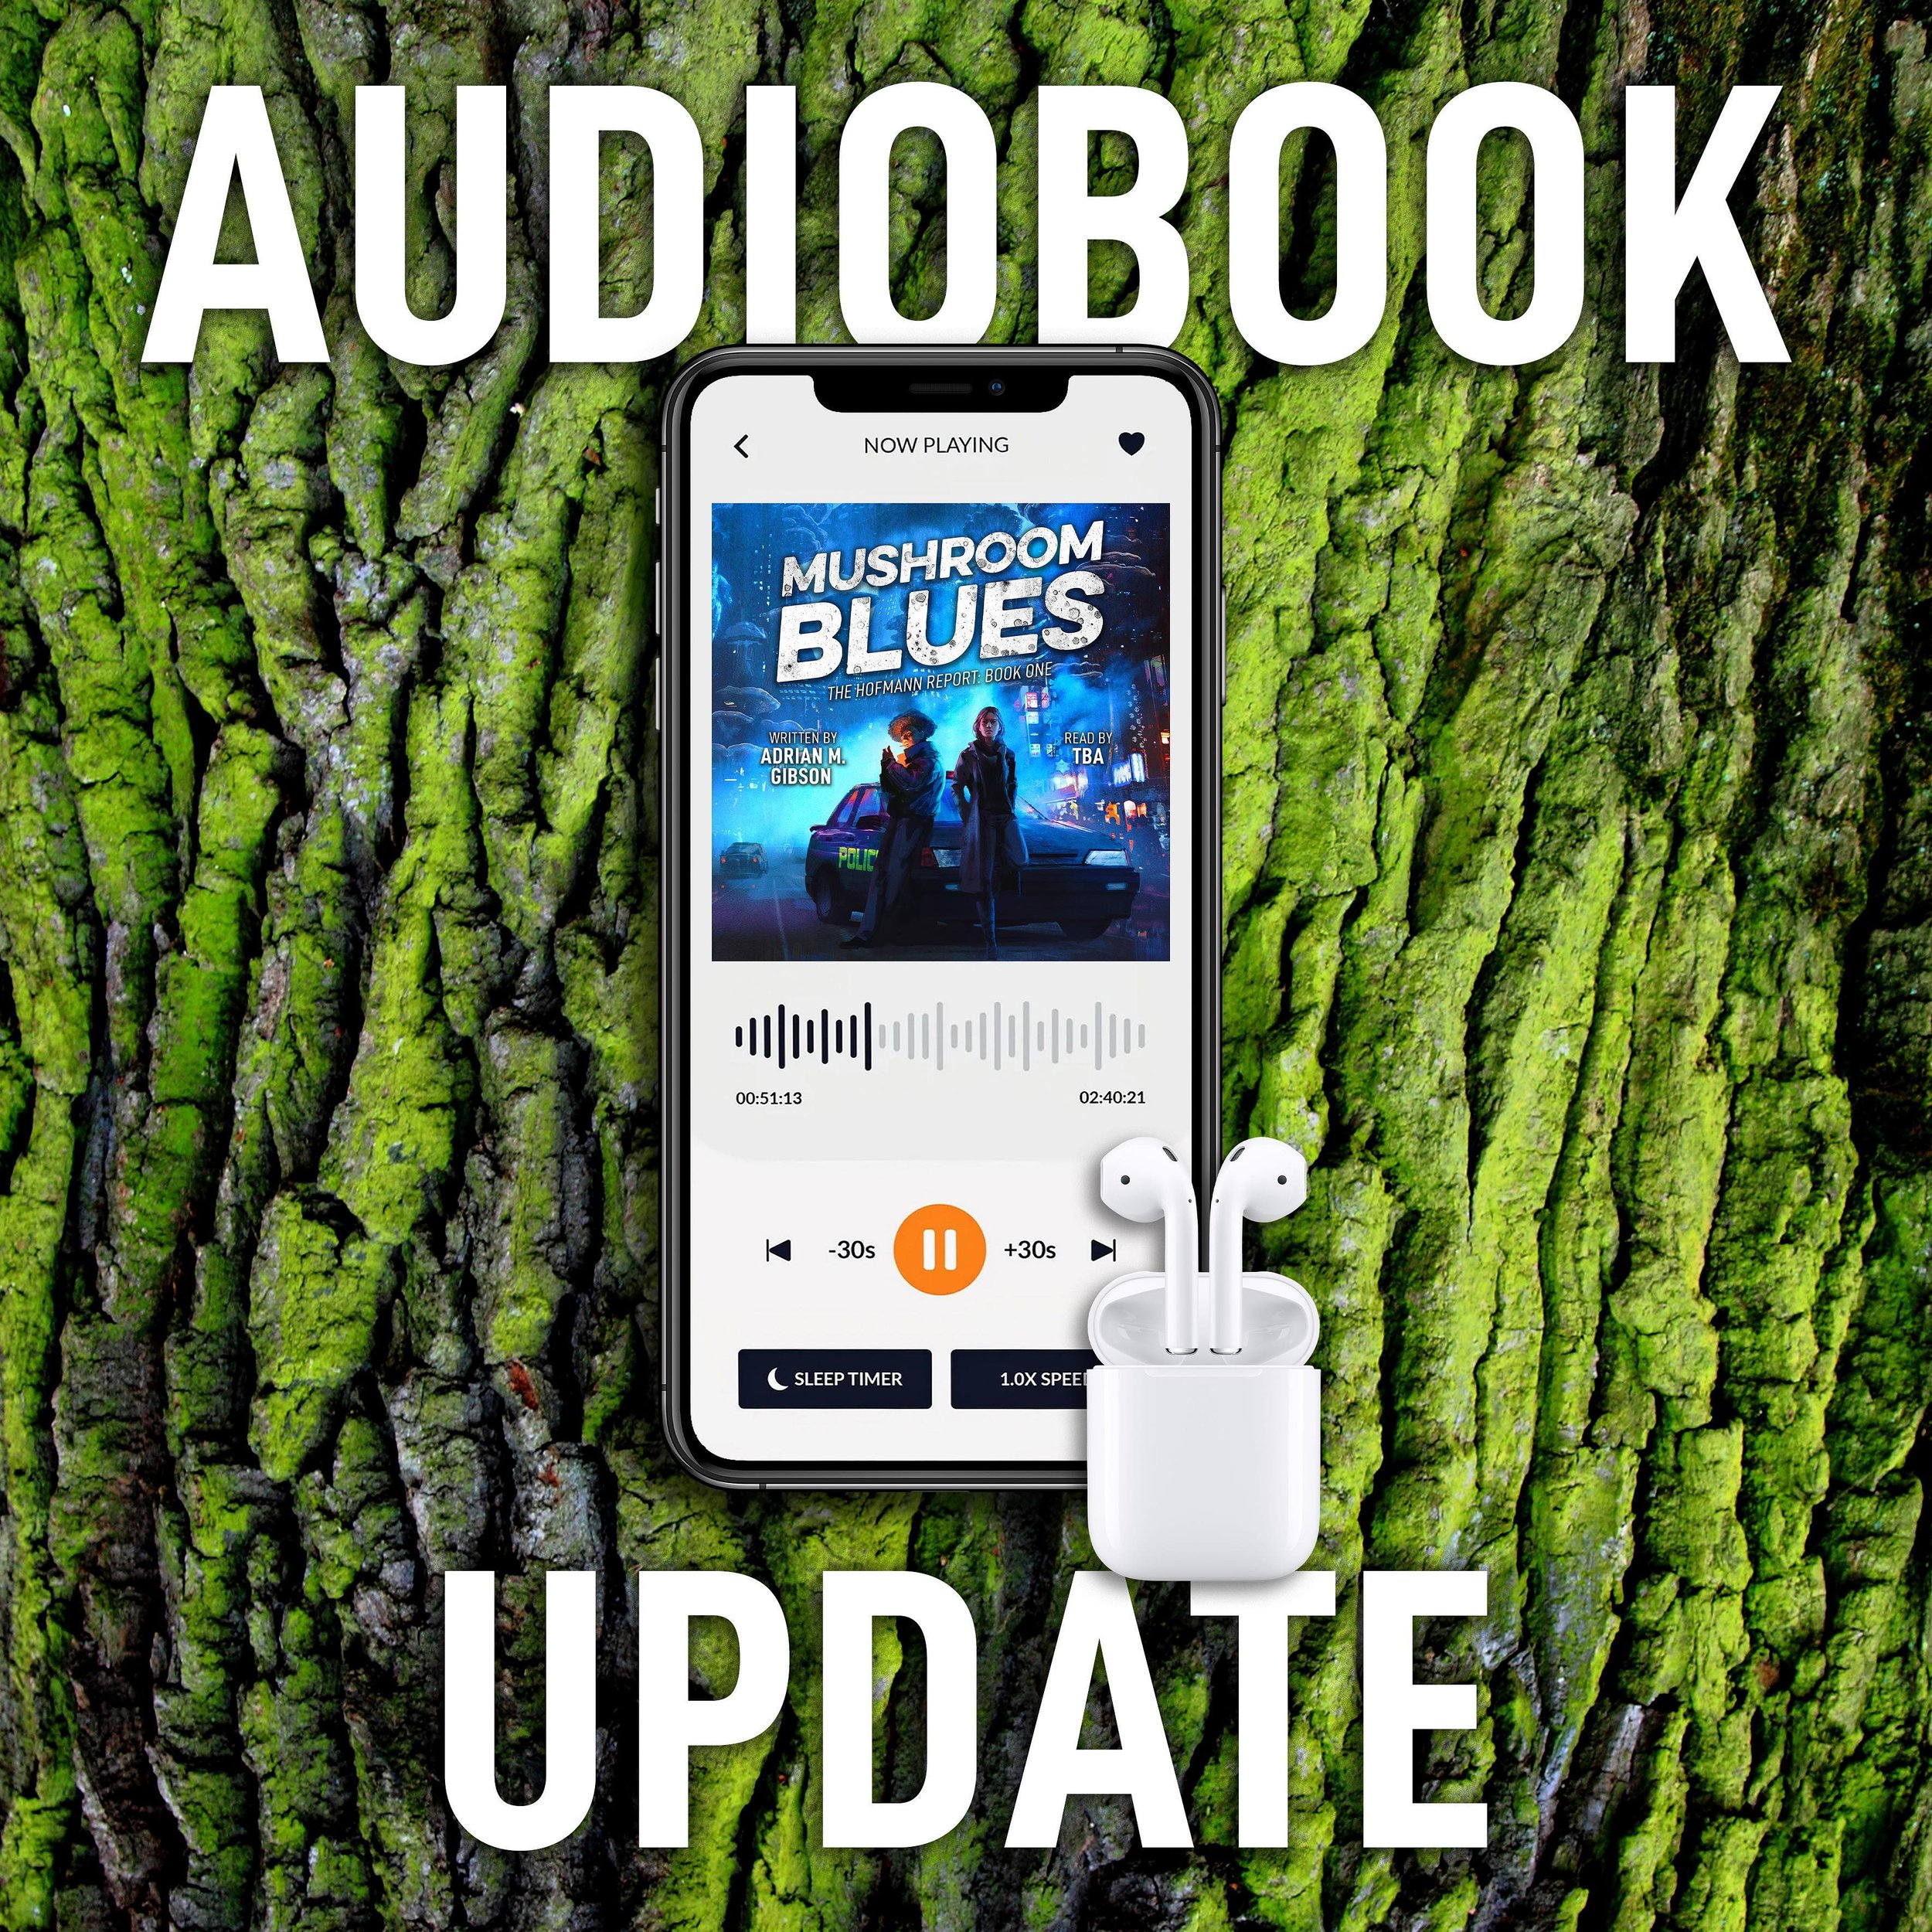 🍄 AUDIOBOOK UPDATE 🍄
This has been a hard decision to make, but I won&rsquo;t be narrating the #MushroomBlues audiobook anymore. On the plus side, I&rsquo;ve booked a professional narrator, and the audiobook will release in fall 2024 (more info TBA